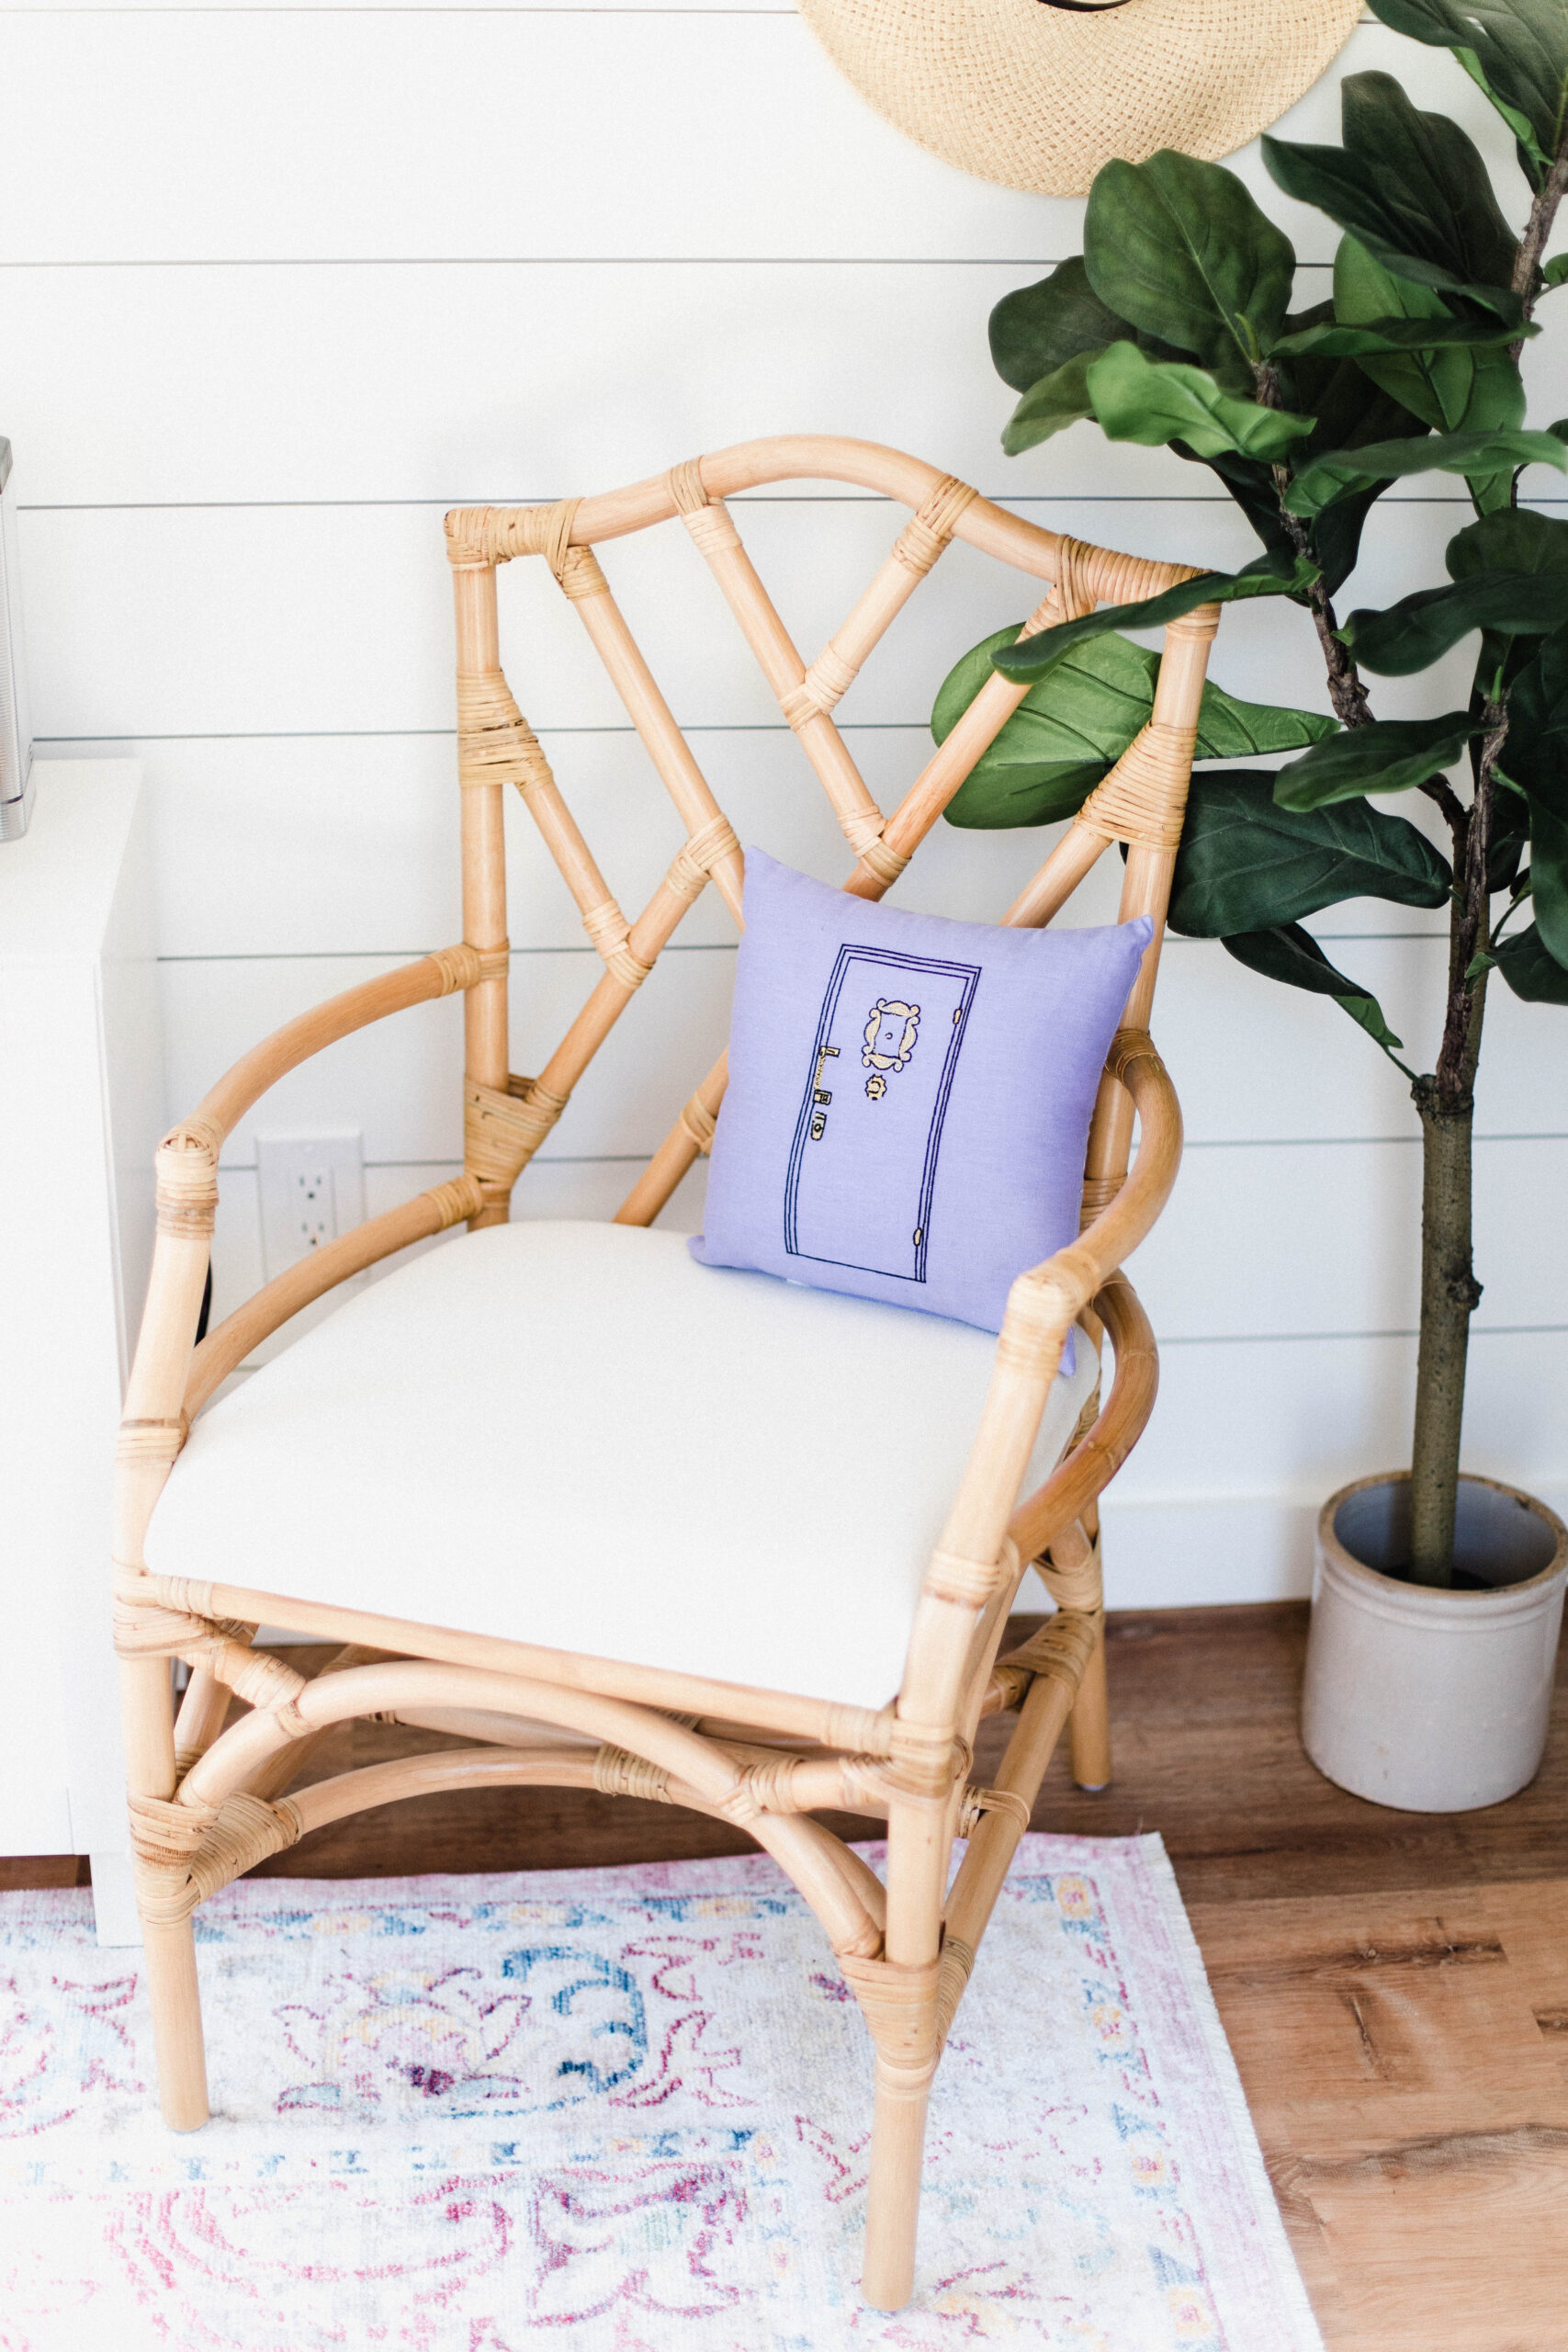 Connecticut life and style blogger Lauren McBride shares her Shed Shed Office Space and how it transformed from a run down shed to an inspirational office.